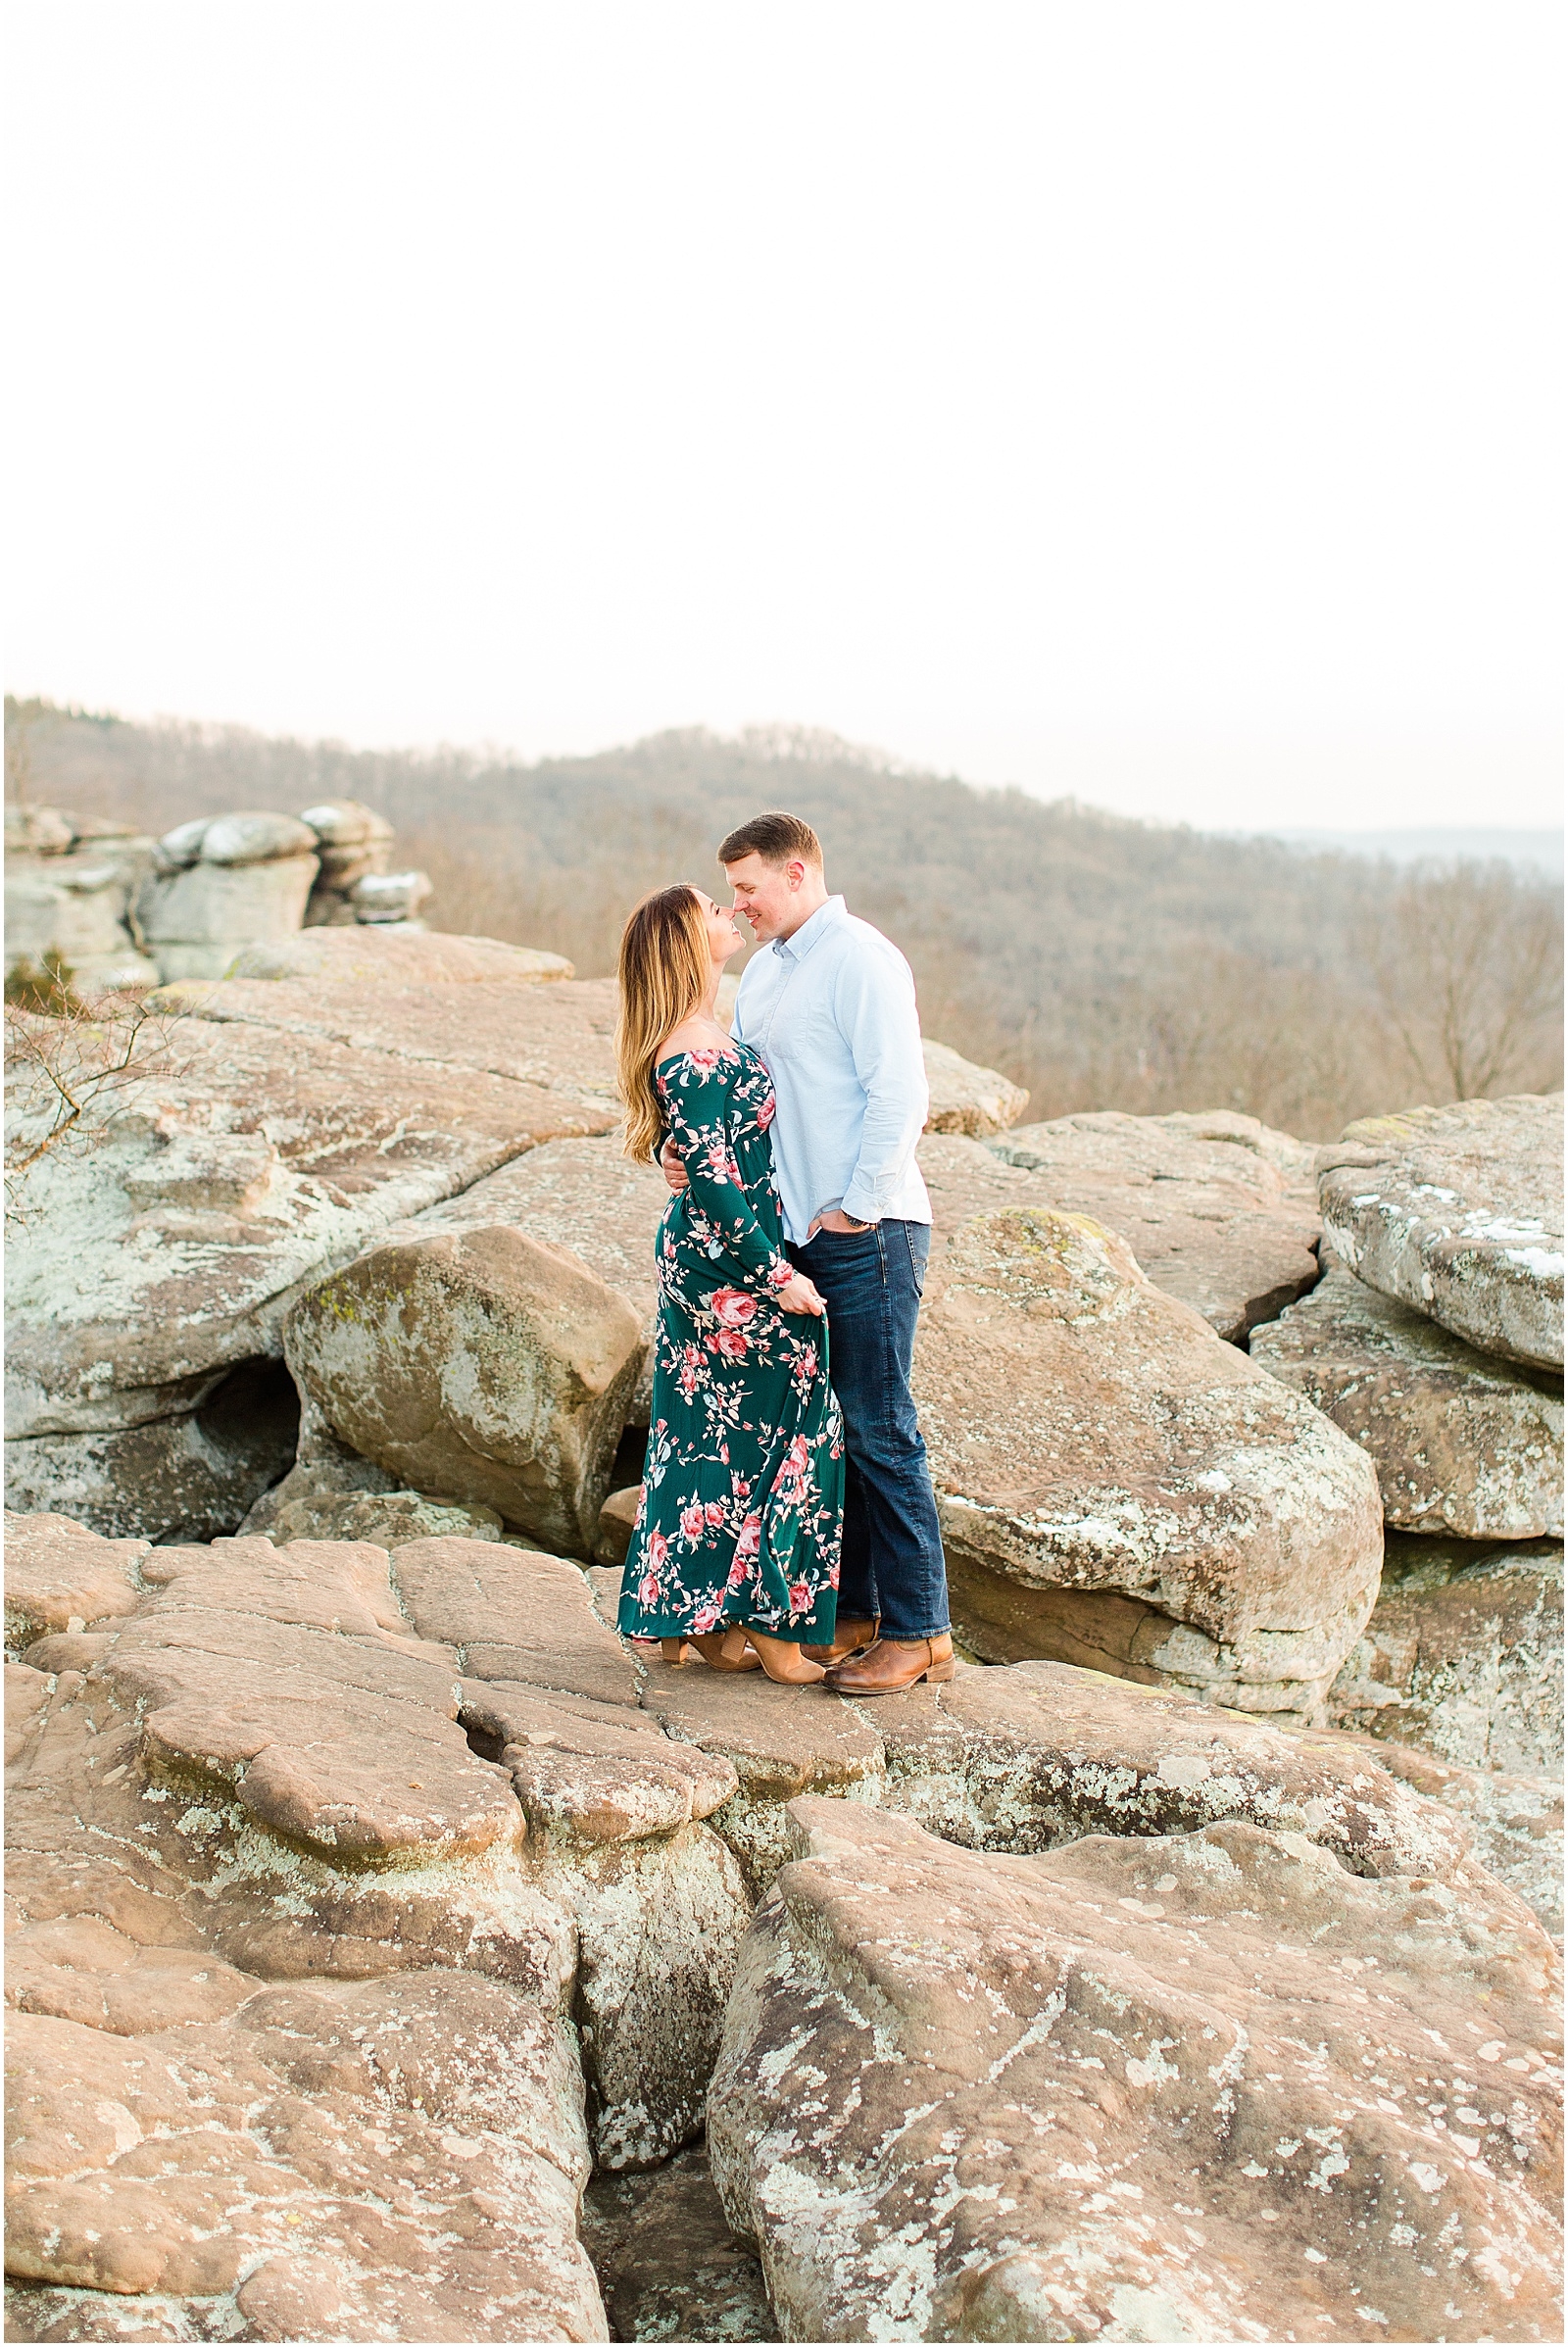 A Sunny Garden of the Gods Engagement Session | Shiloh and Lee | Bret and Brandie Photography085.jpg